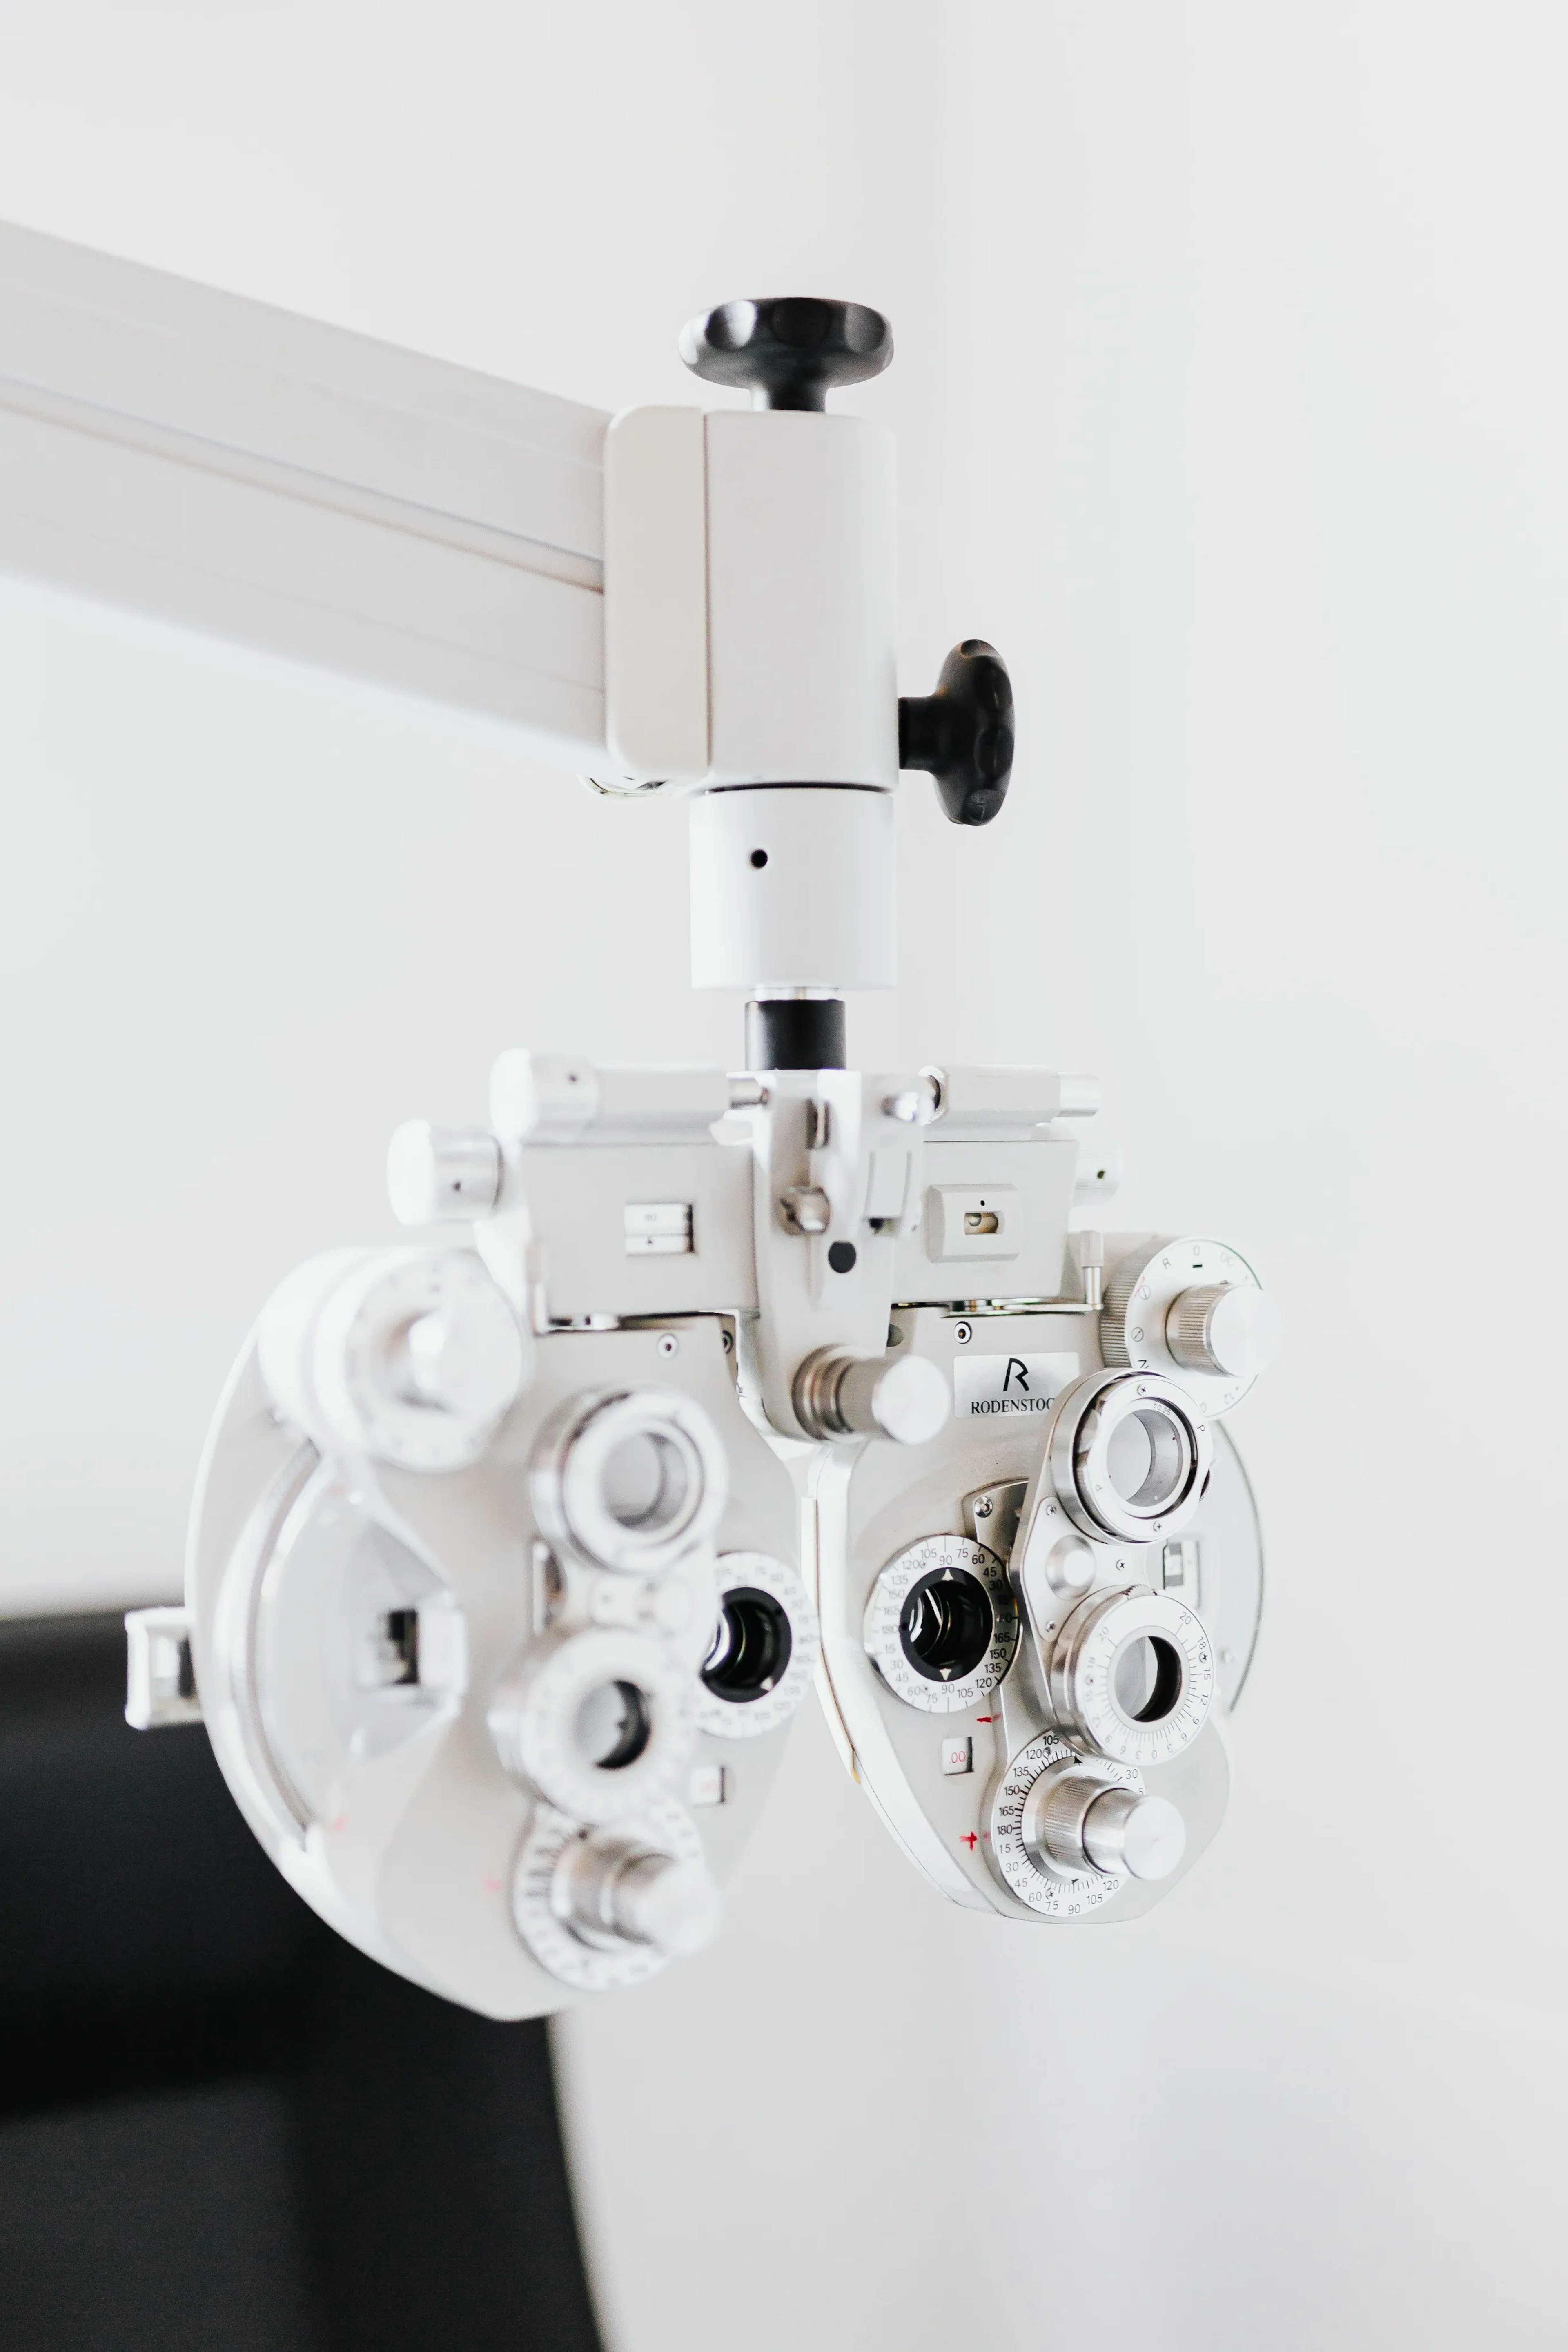 Picture of an eye test tool